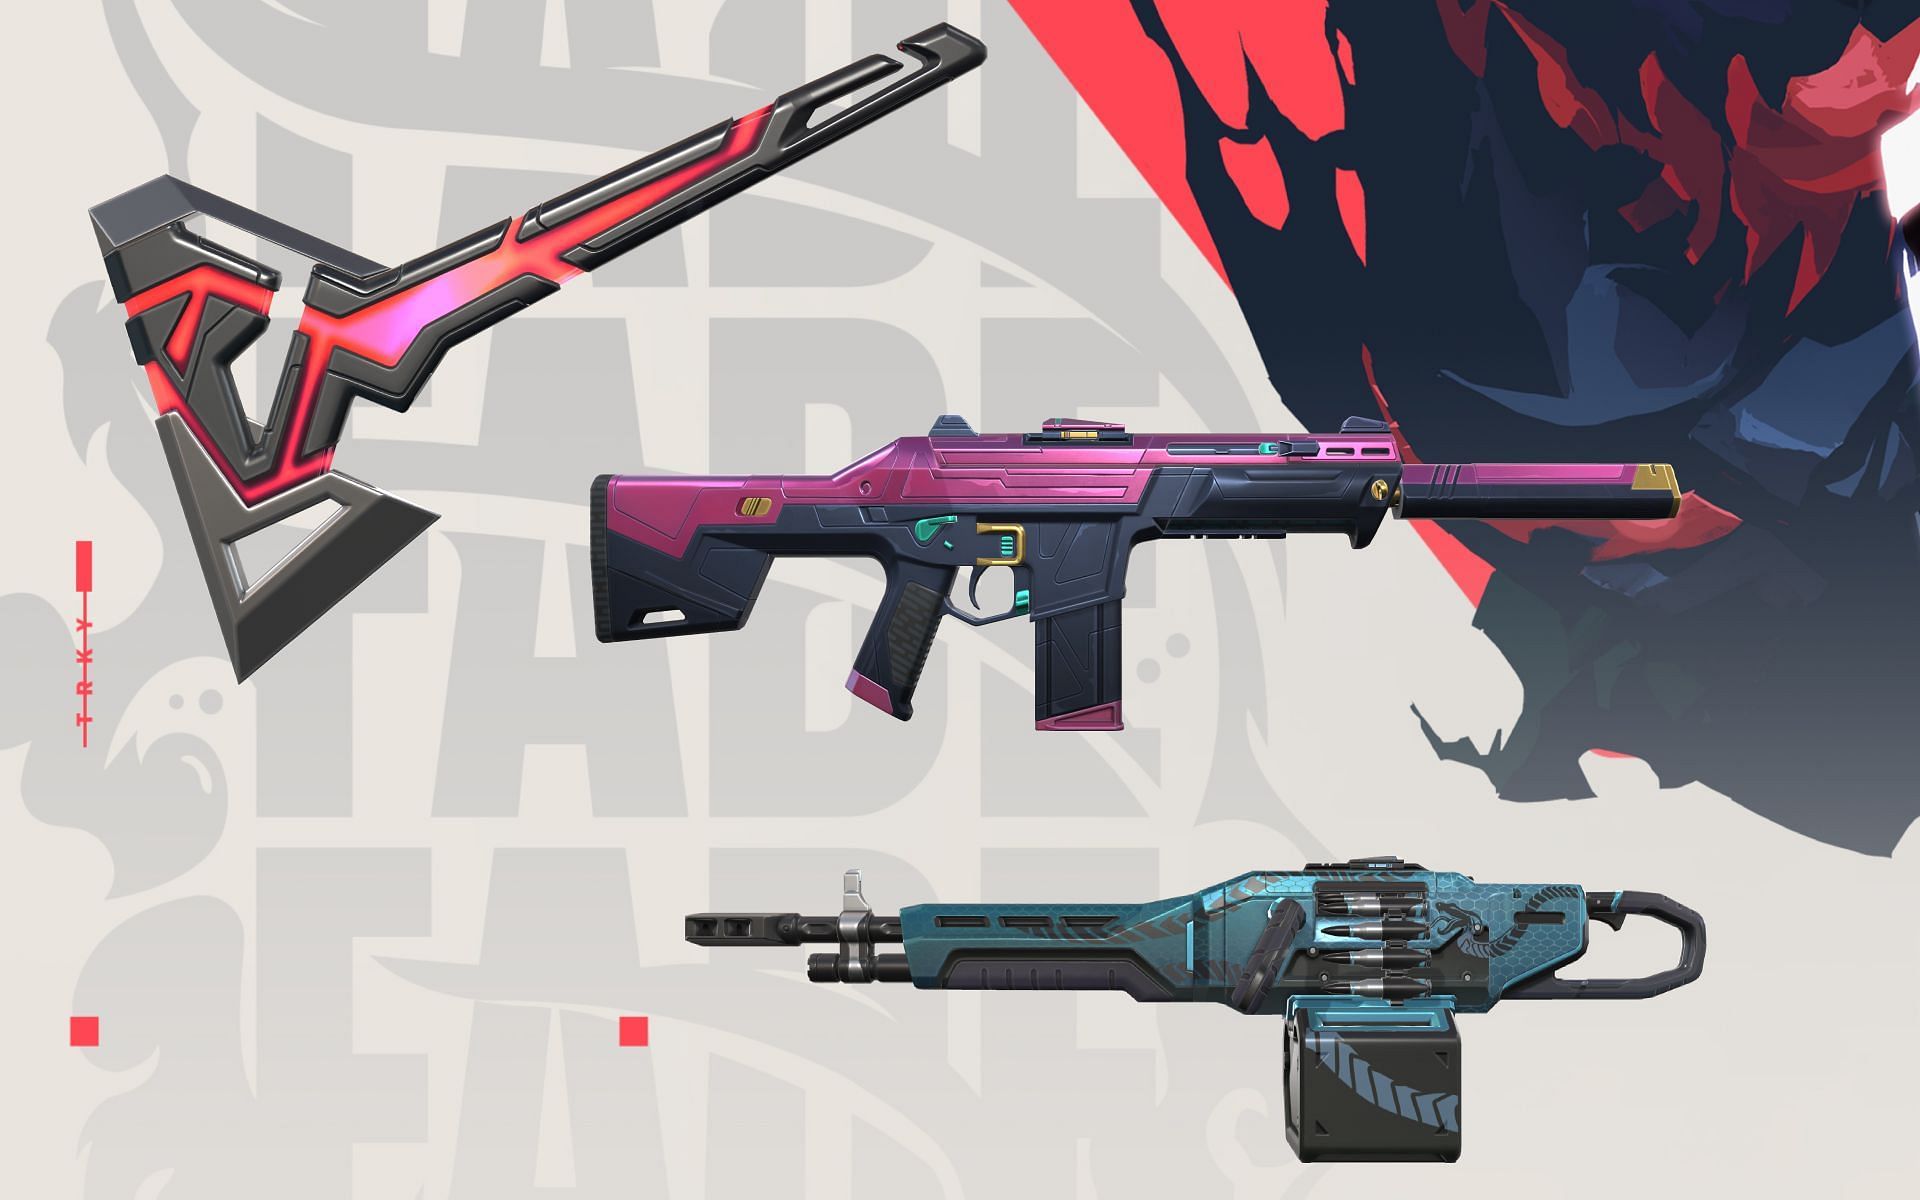 .SYS, Cobra Coalition and Hue Shift skin bundles from Episode 4 Act 3 Battlepass in Valorant (Image via Sportskeeda)